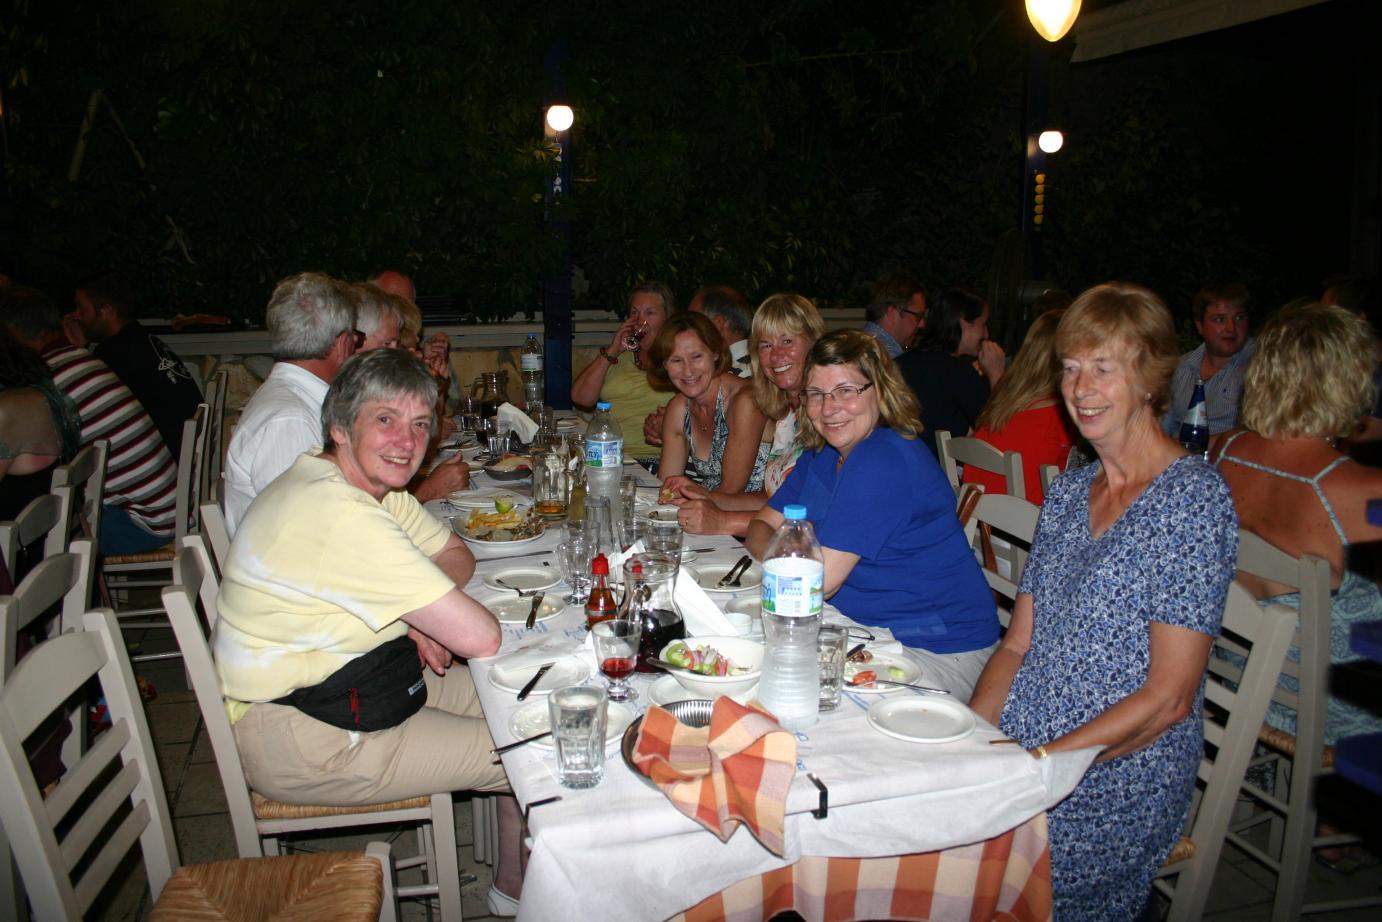 Tuesday evening, 15th September, a meal with the rest of the flotilla in Agia Effimia.